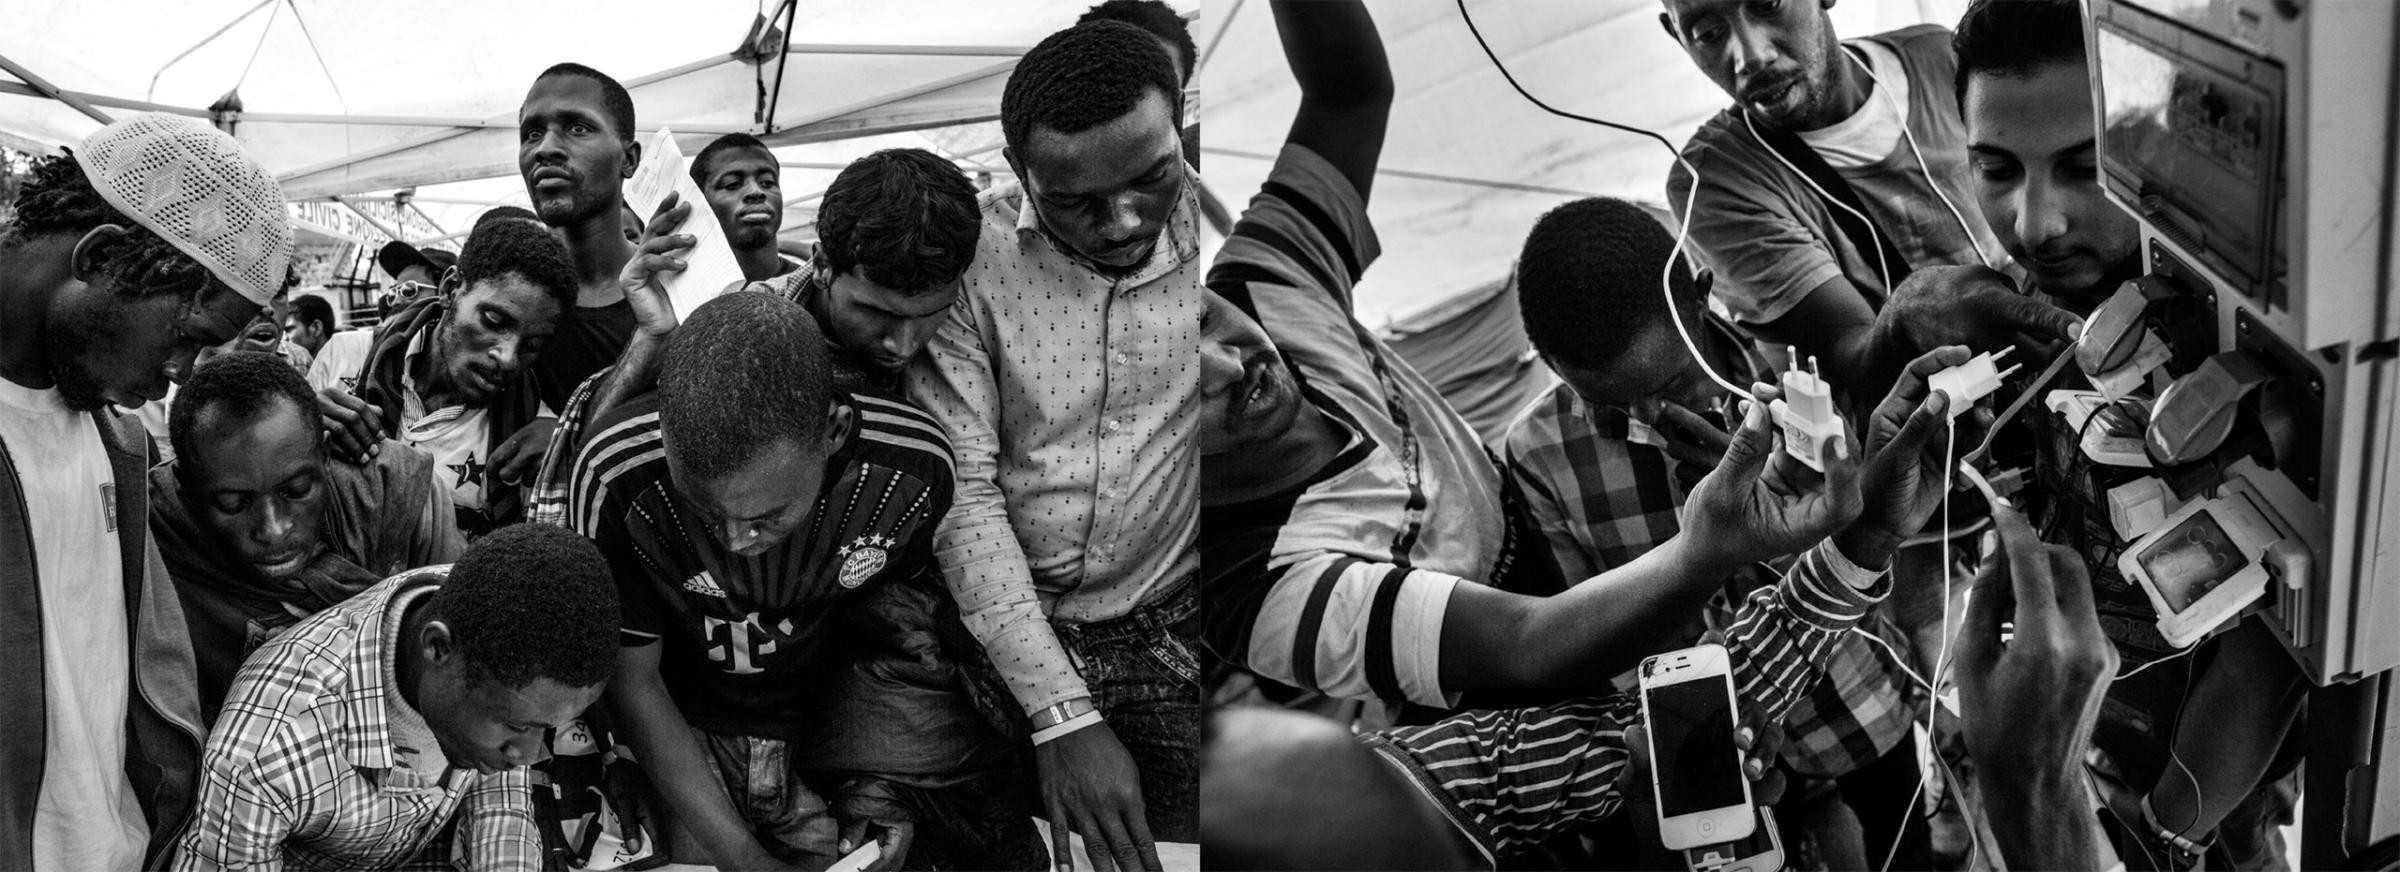 A double page from The Dream: At left; African migrants register at the port of Messina, Italy, July 22, 2015. At right; Refugees recharge their phones after the long sea journey, Augusta, Italy, June 20, 2015,